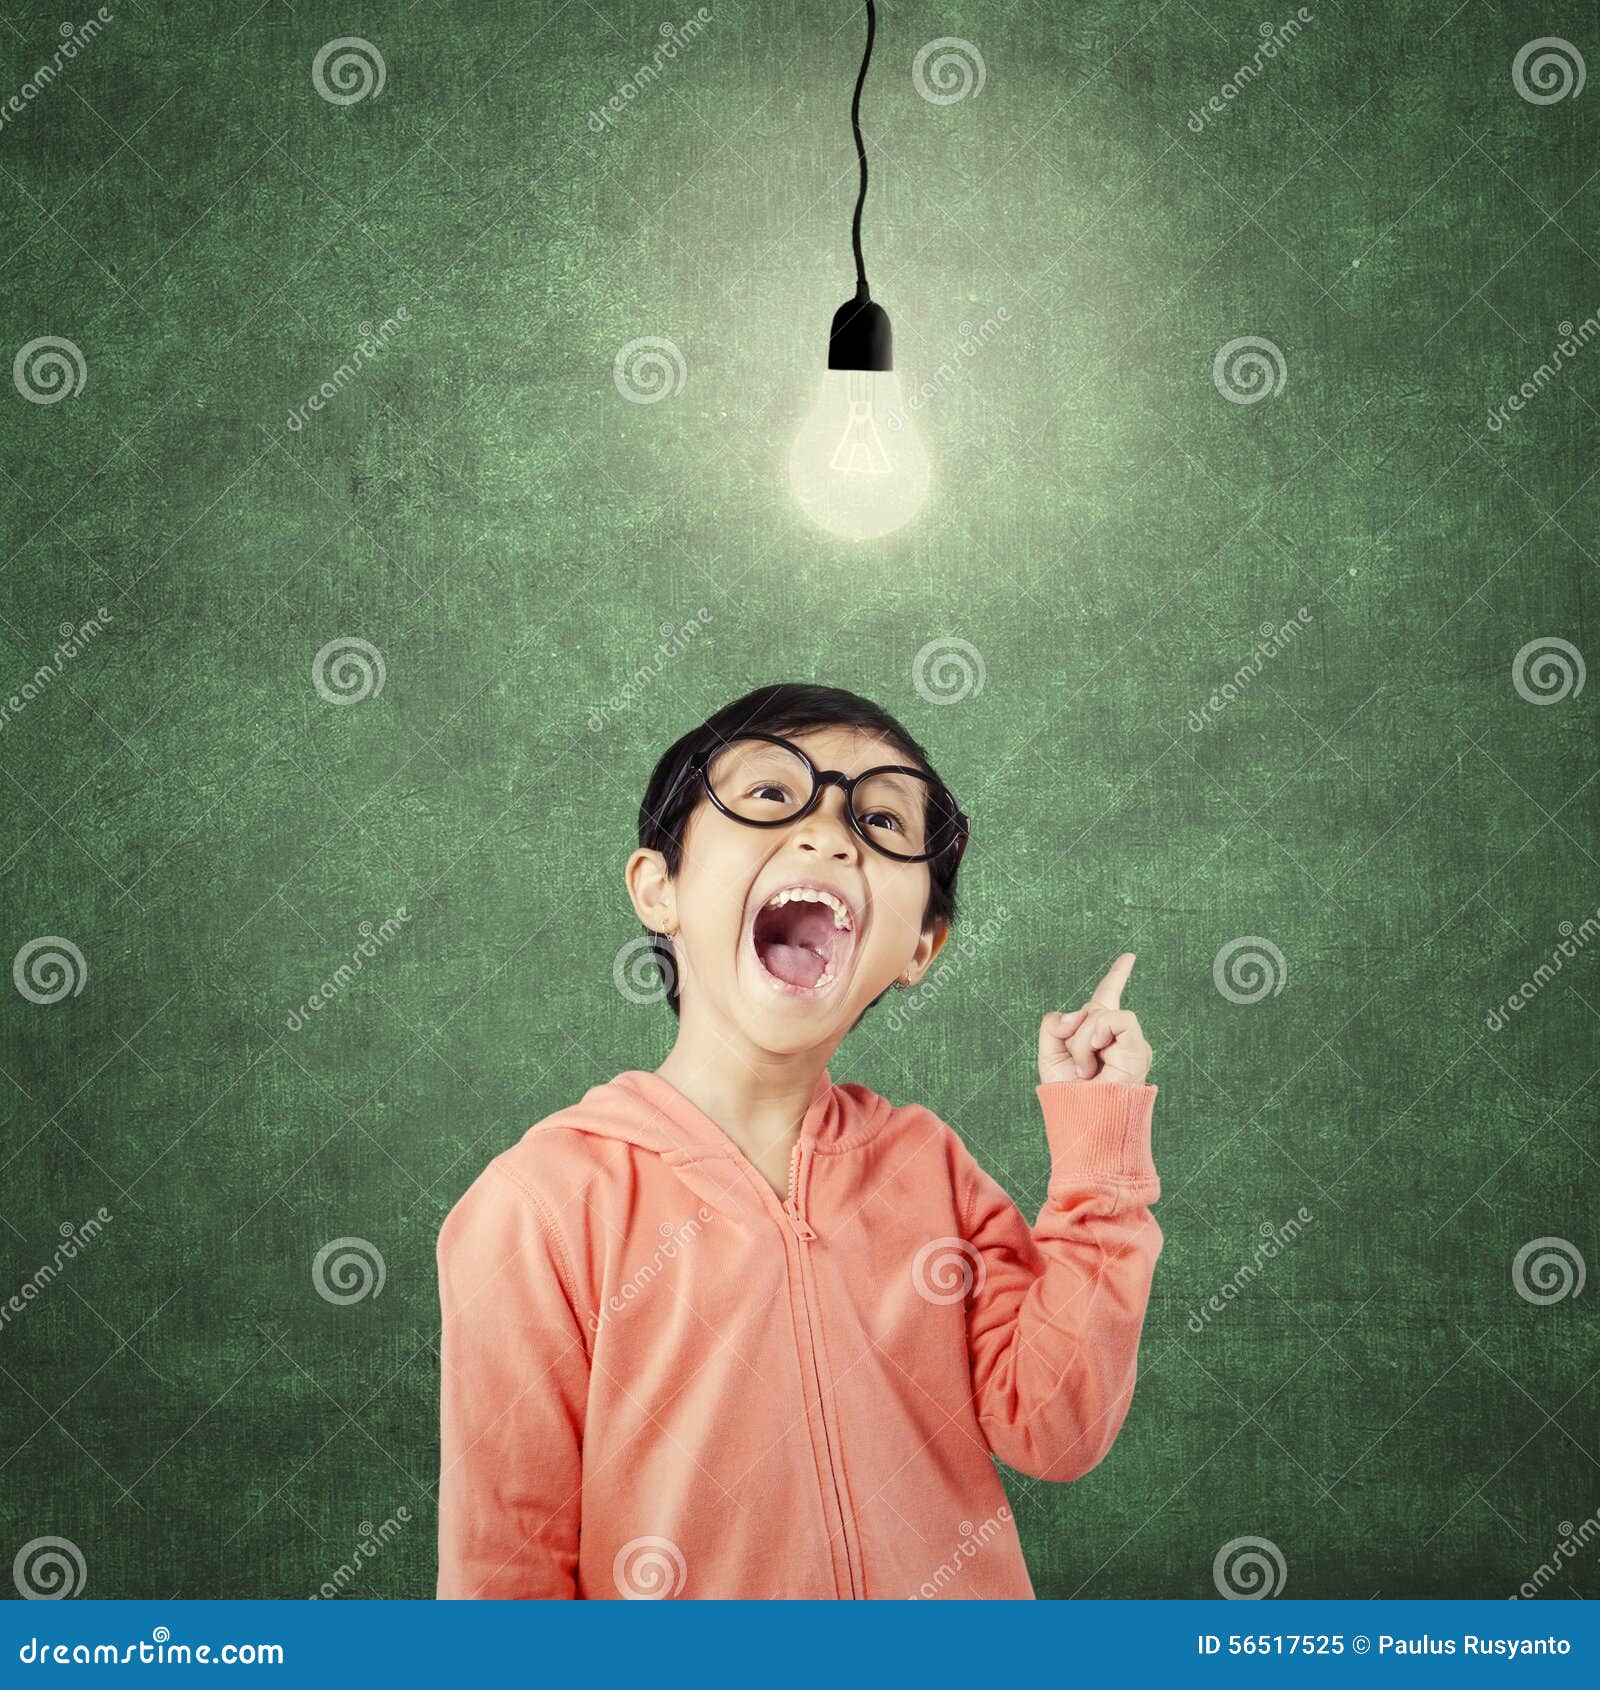 Clever Kindergarten Student Pointing At Bright Lamp Stock Image - Image of genius ...1300 x 1390